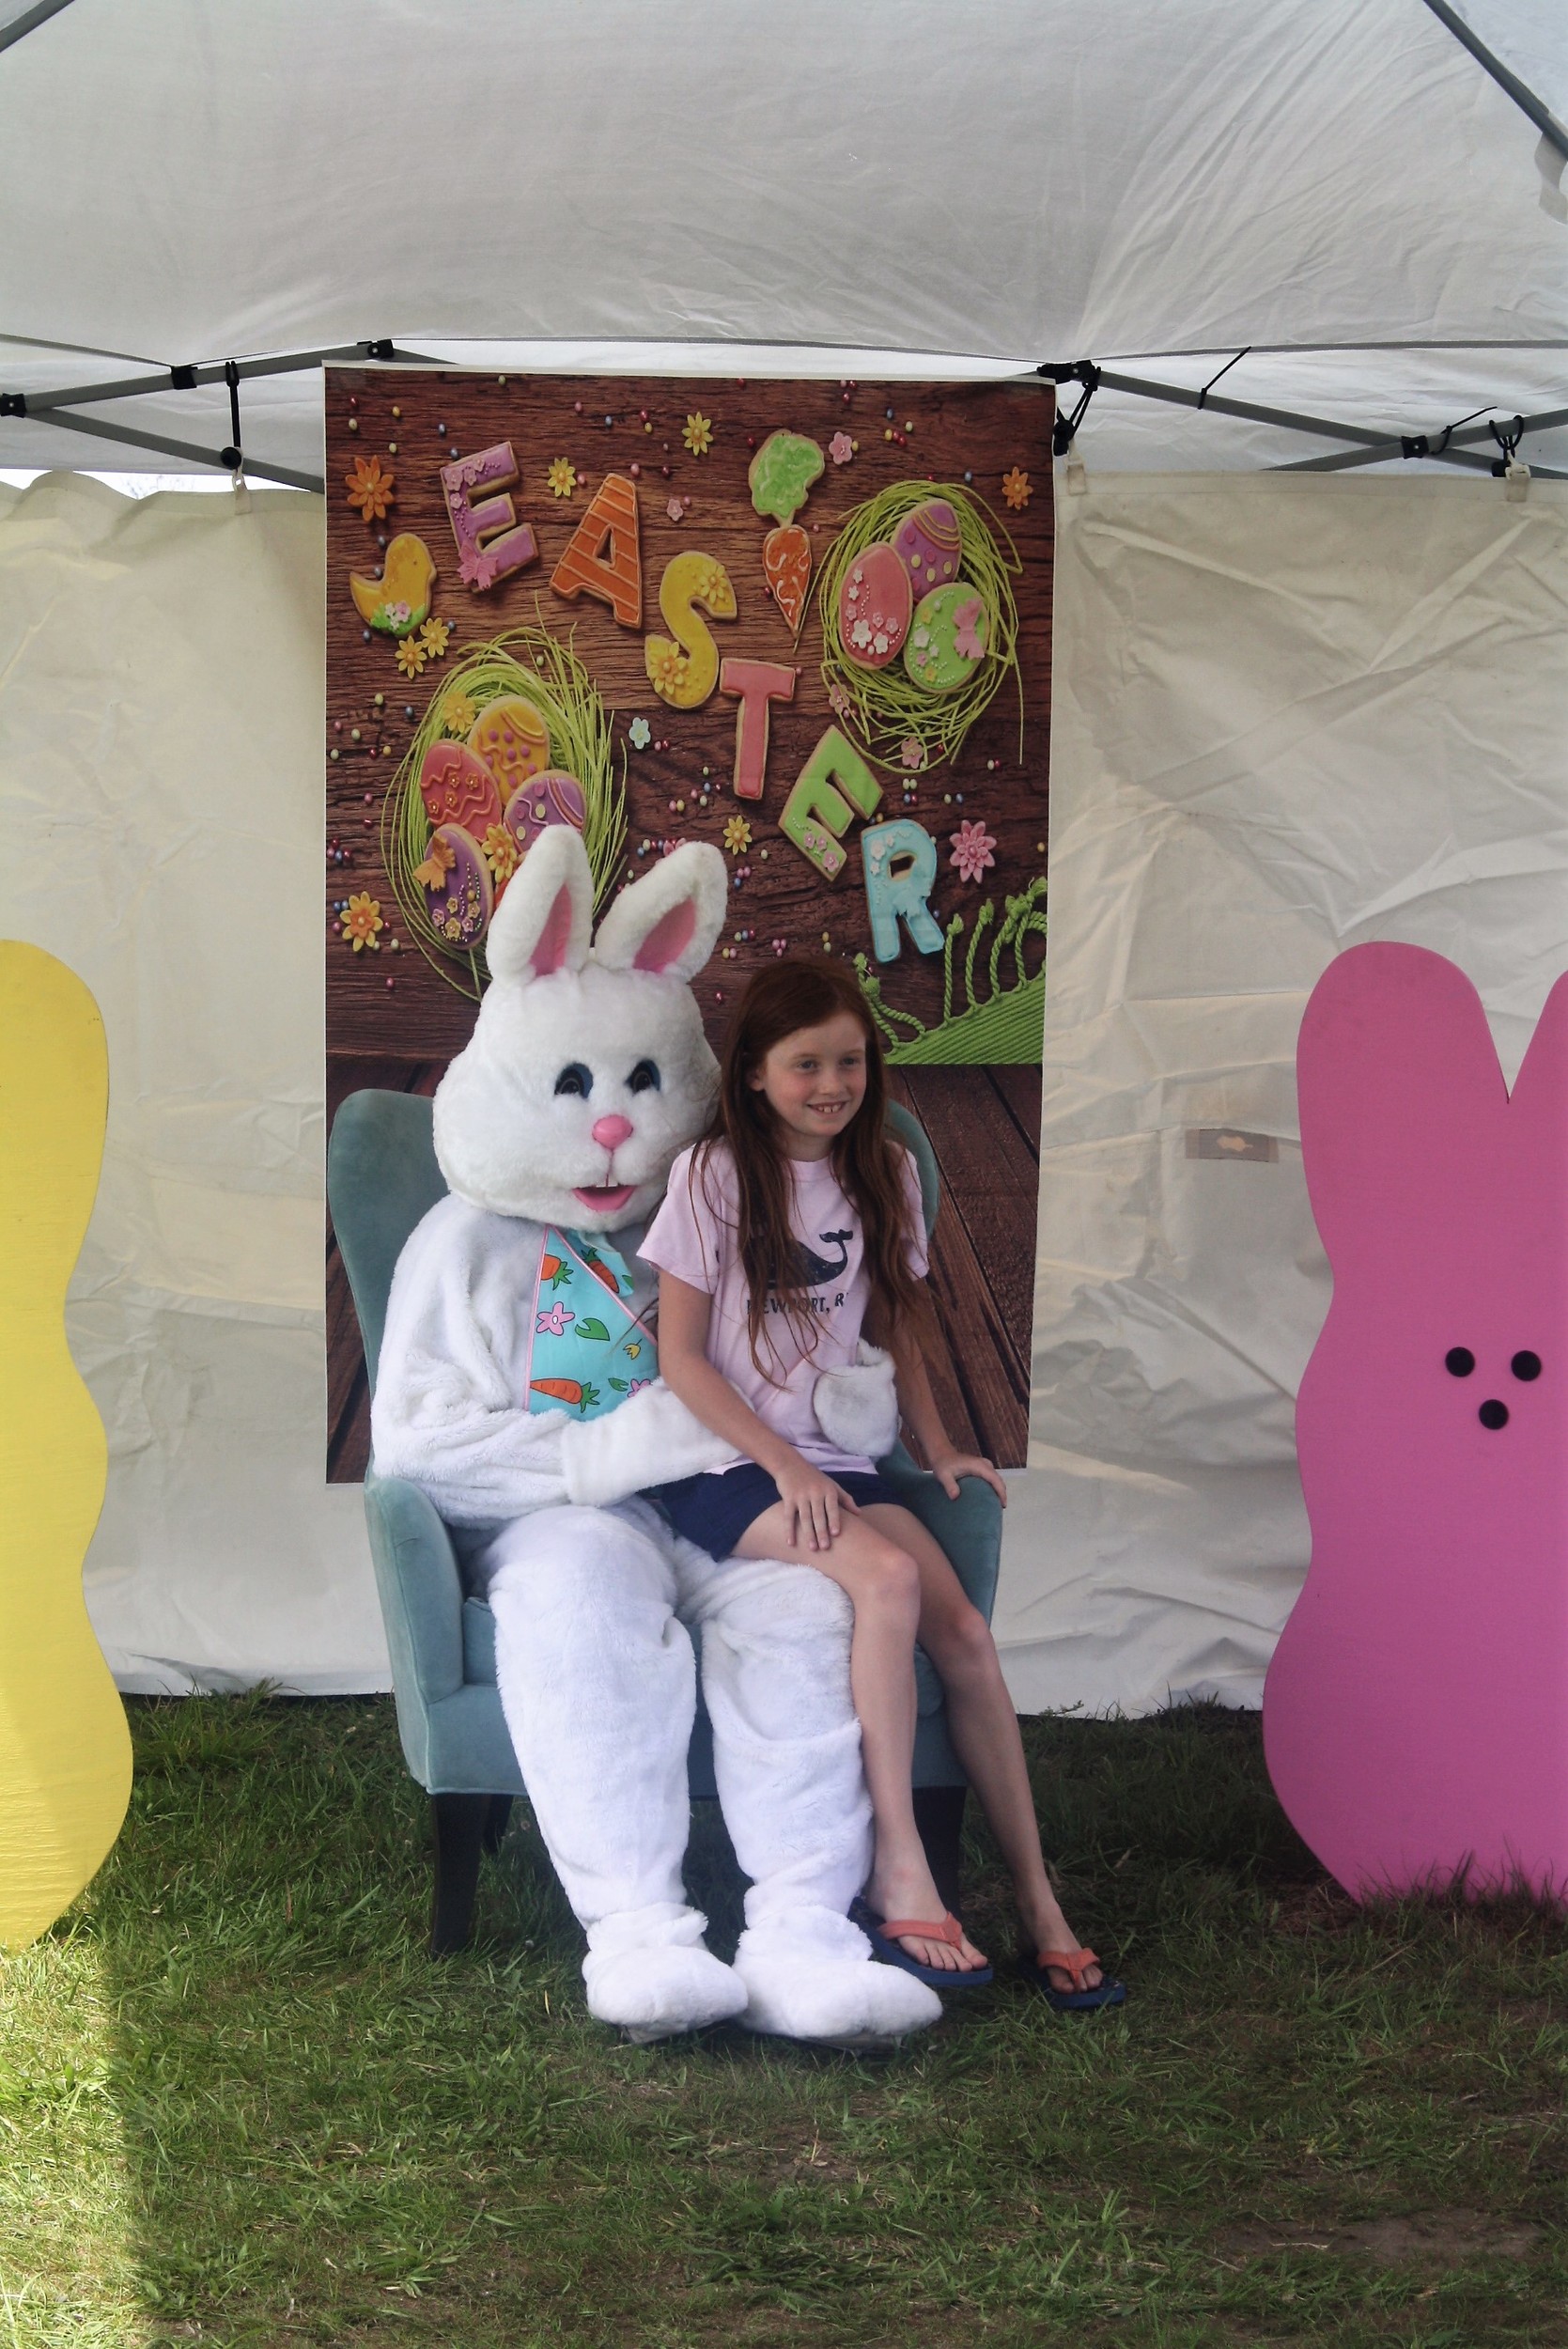 The Easter Bunny greets children at the Nocatee Farmers Market.